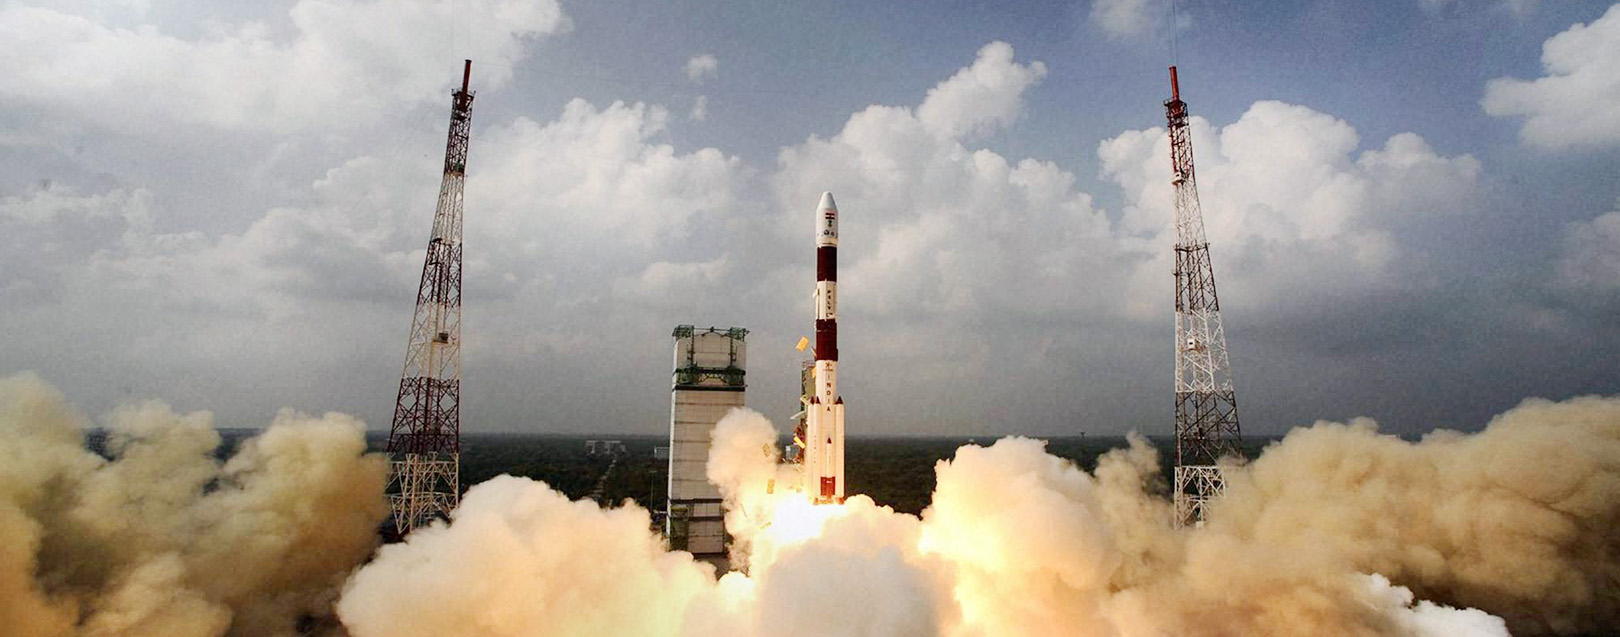 India capable of developing space station: ISRO chief